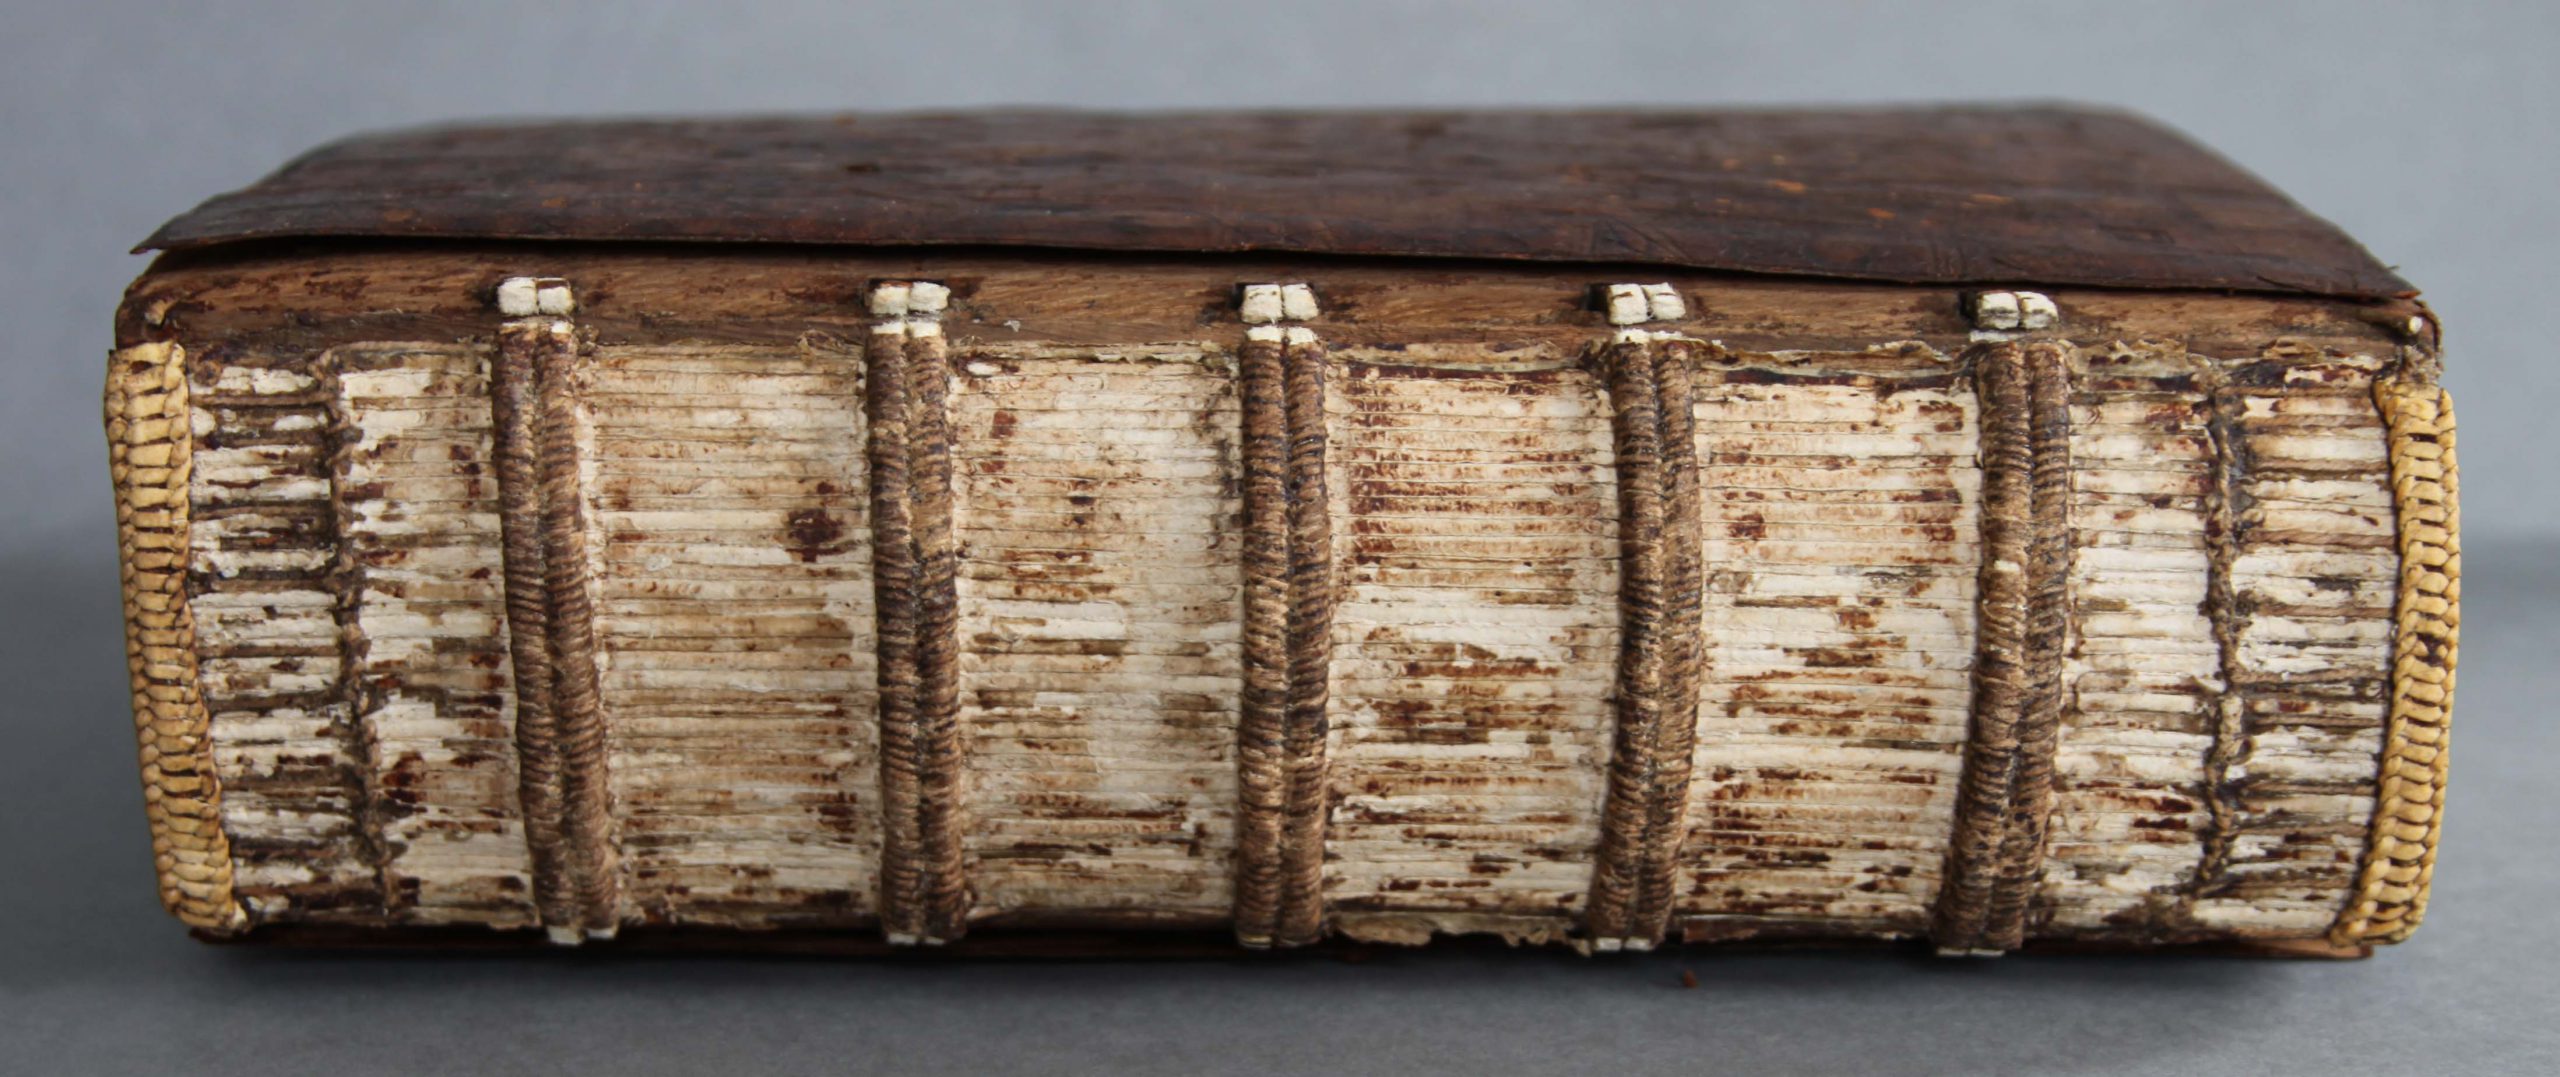 Recovering and Re-Covering: Conservation of a Fifteenth-Century Bookbinding